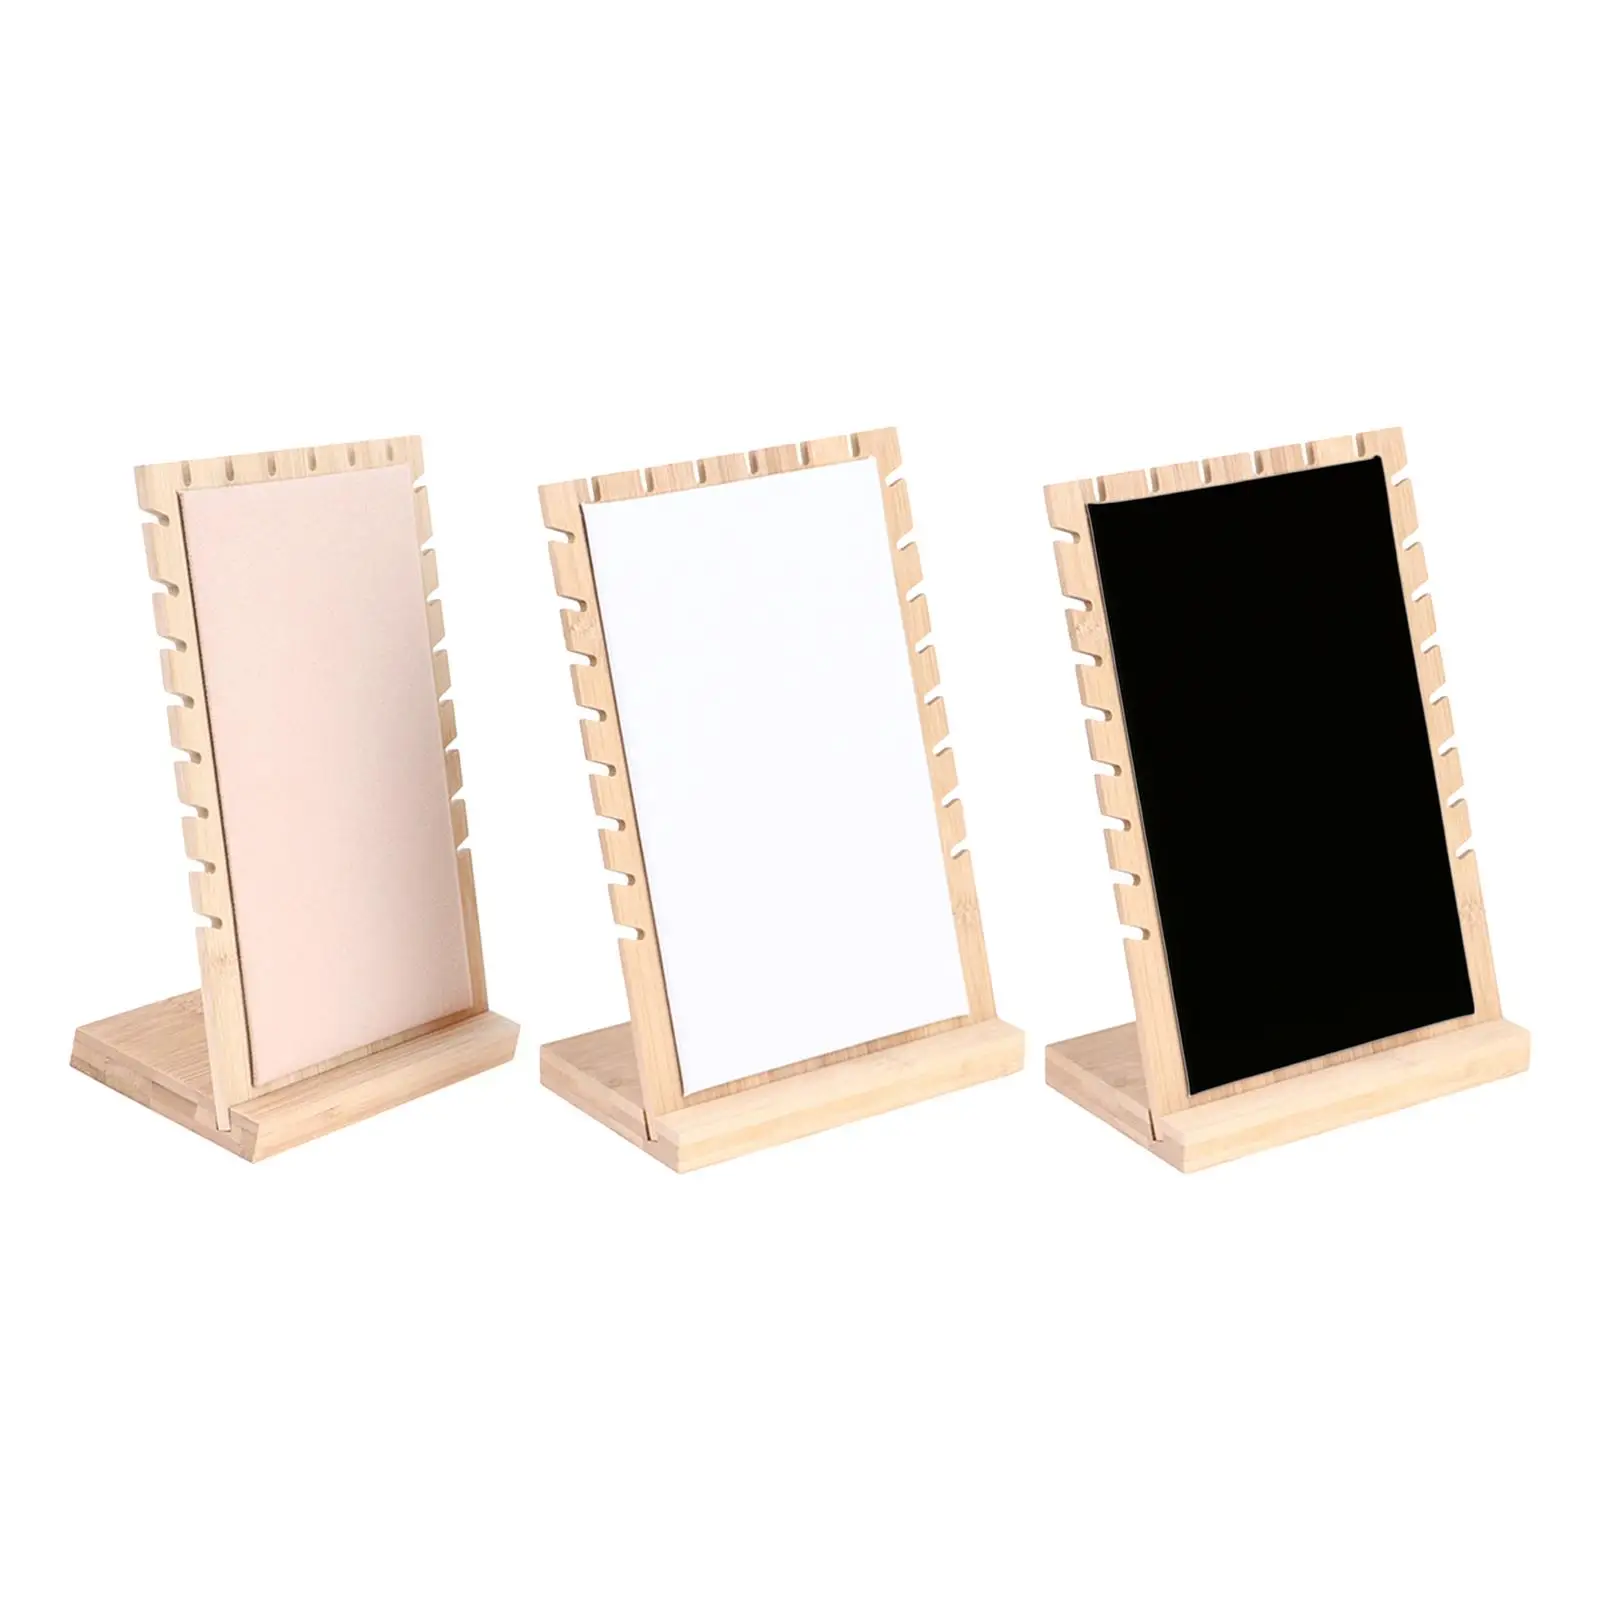 Jewelry Display Stand Wooden Plank Freestanding Soft Mat Necklace Display Board Organizer for Pendant Showcase Jewelry Store